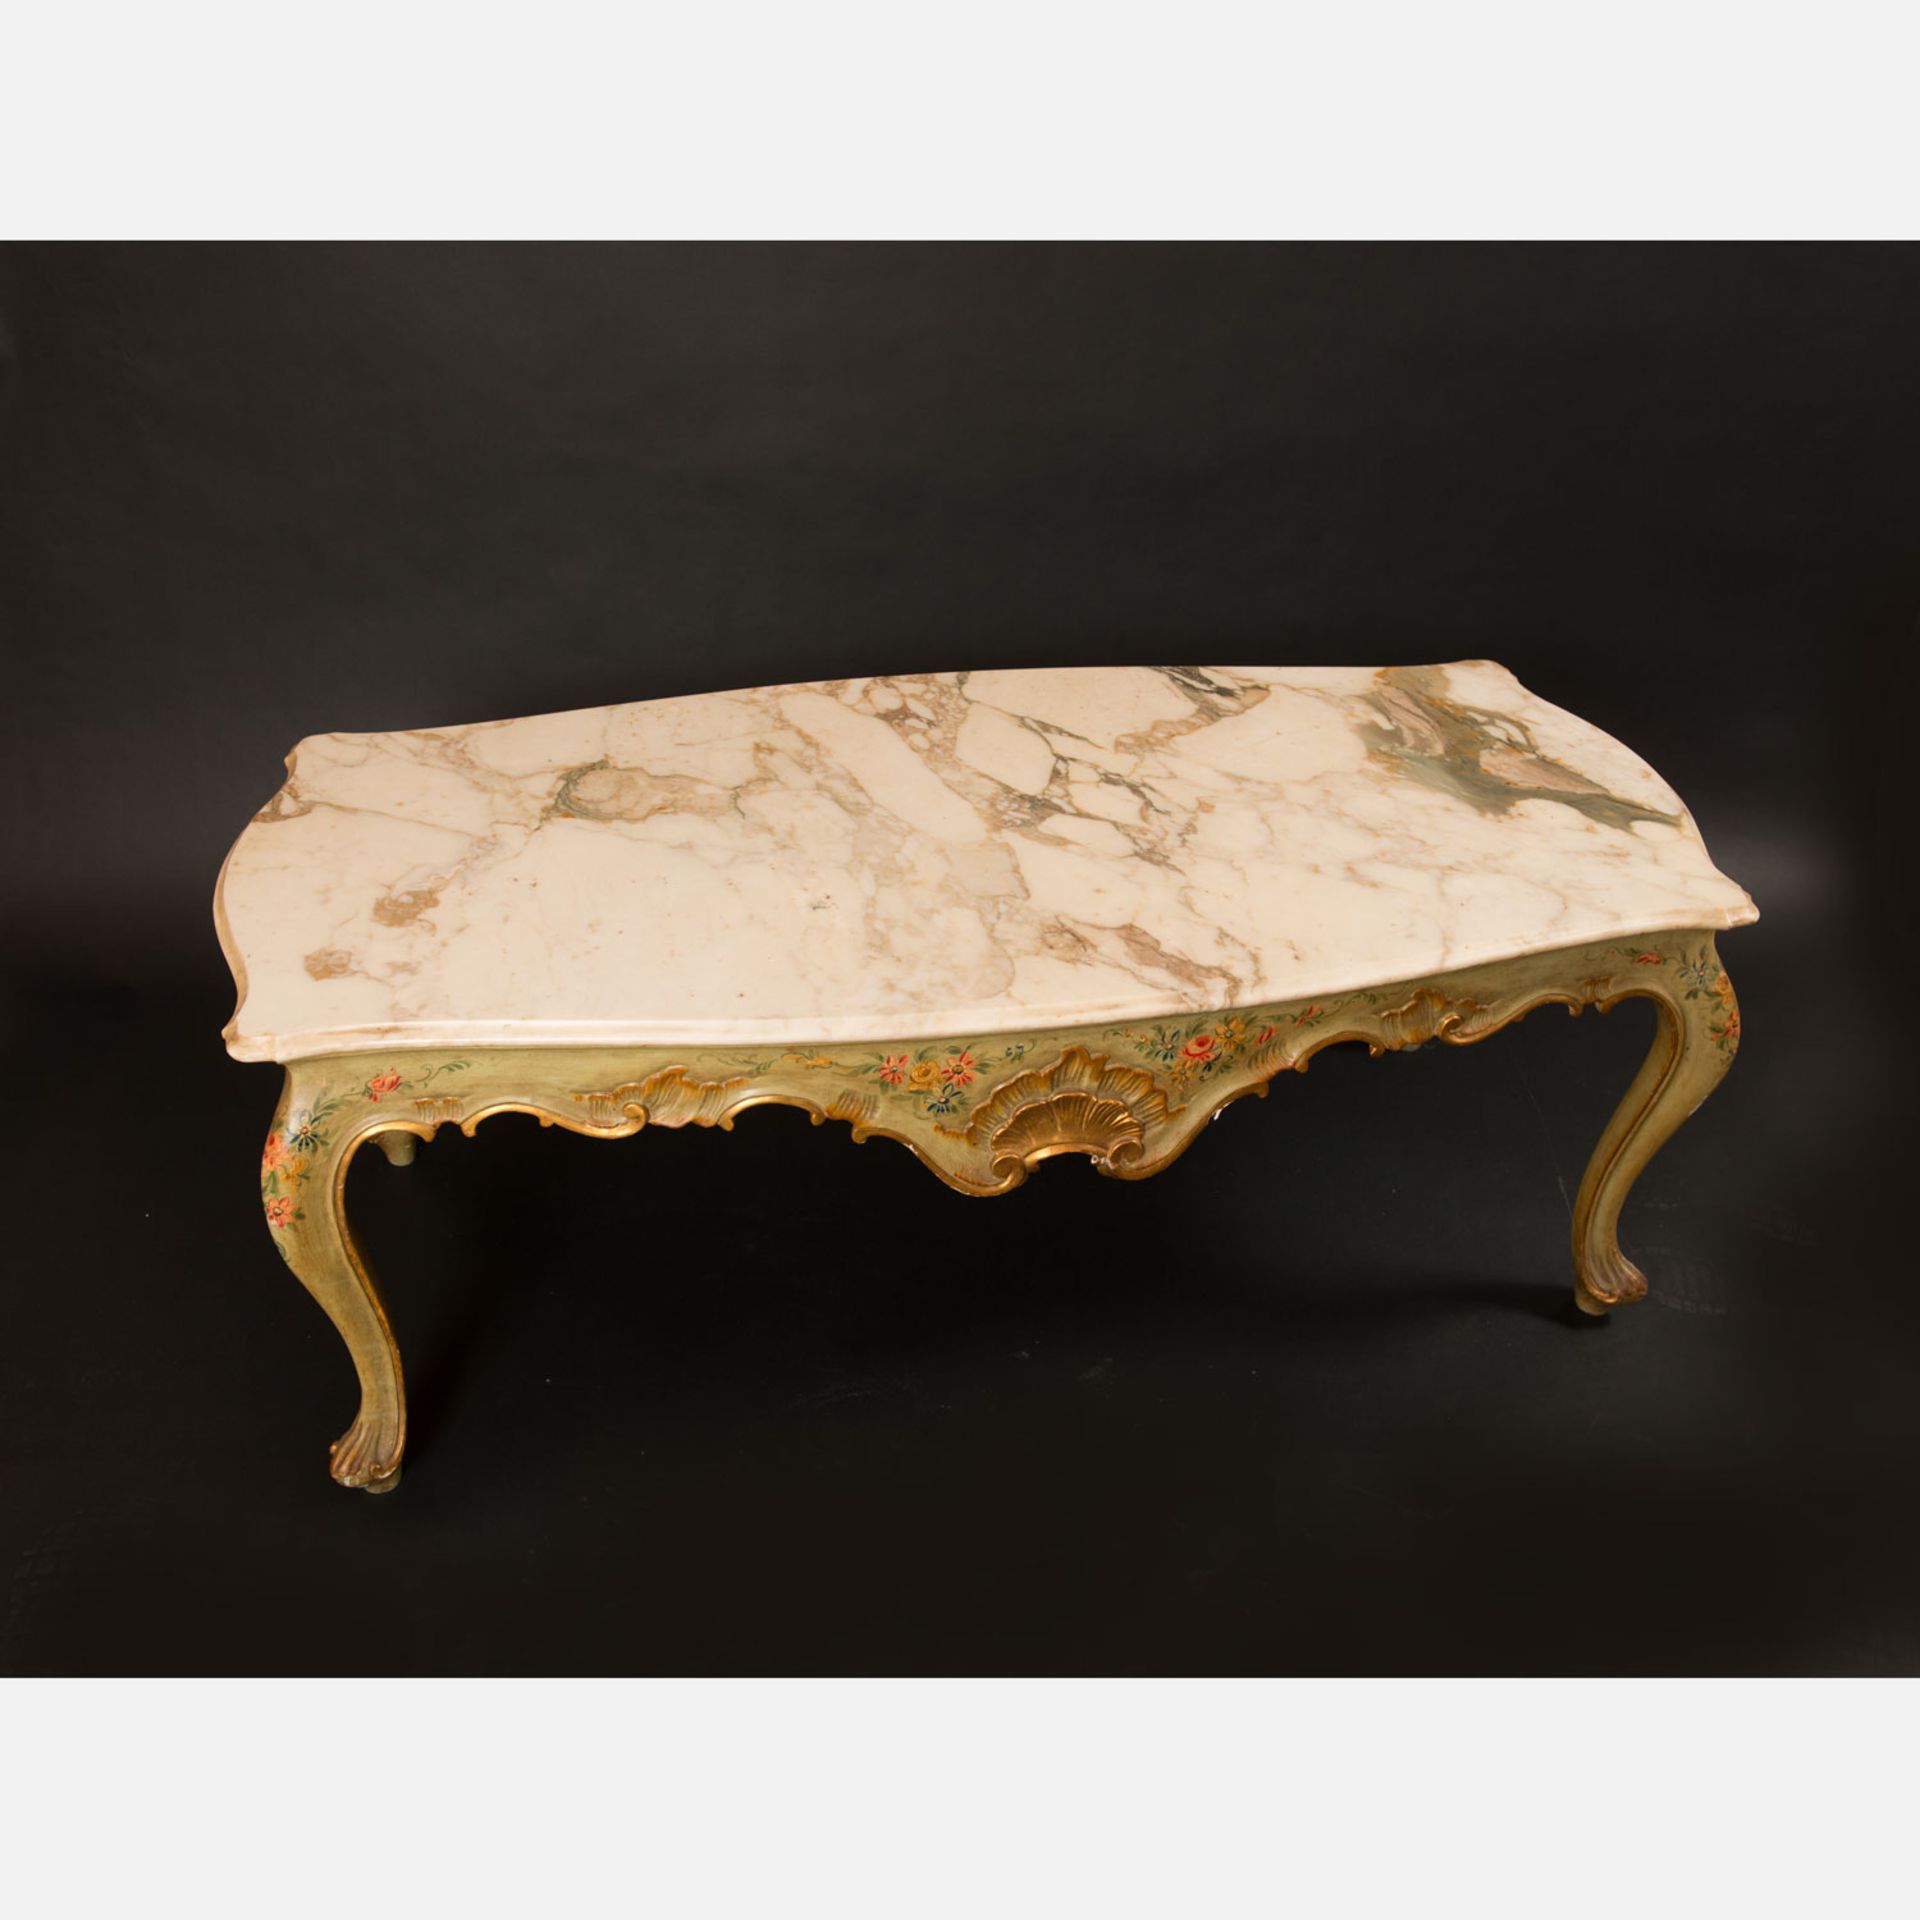 Venetian Sofa Table, in Baroque style, carved ornaments with lacquer decorations, white marble